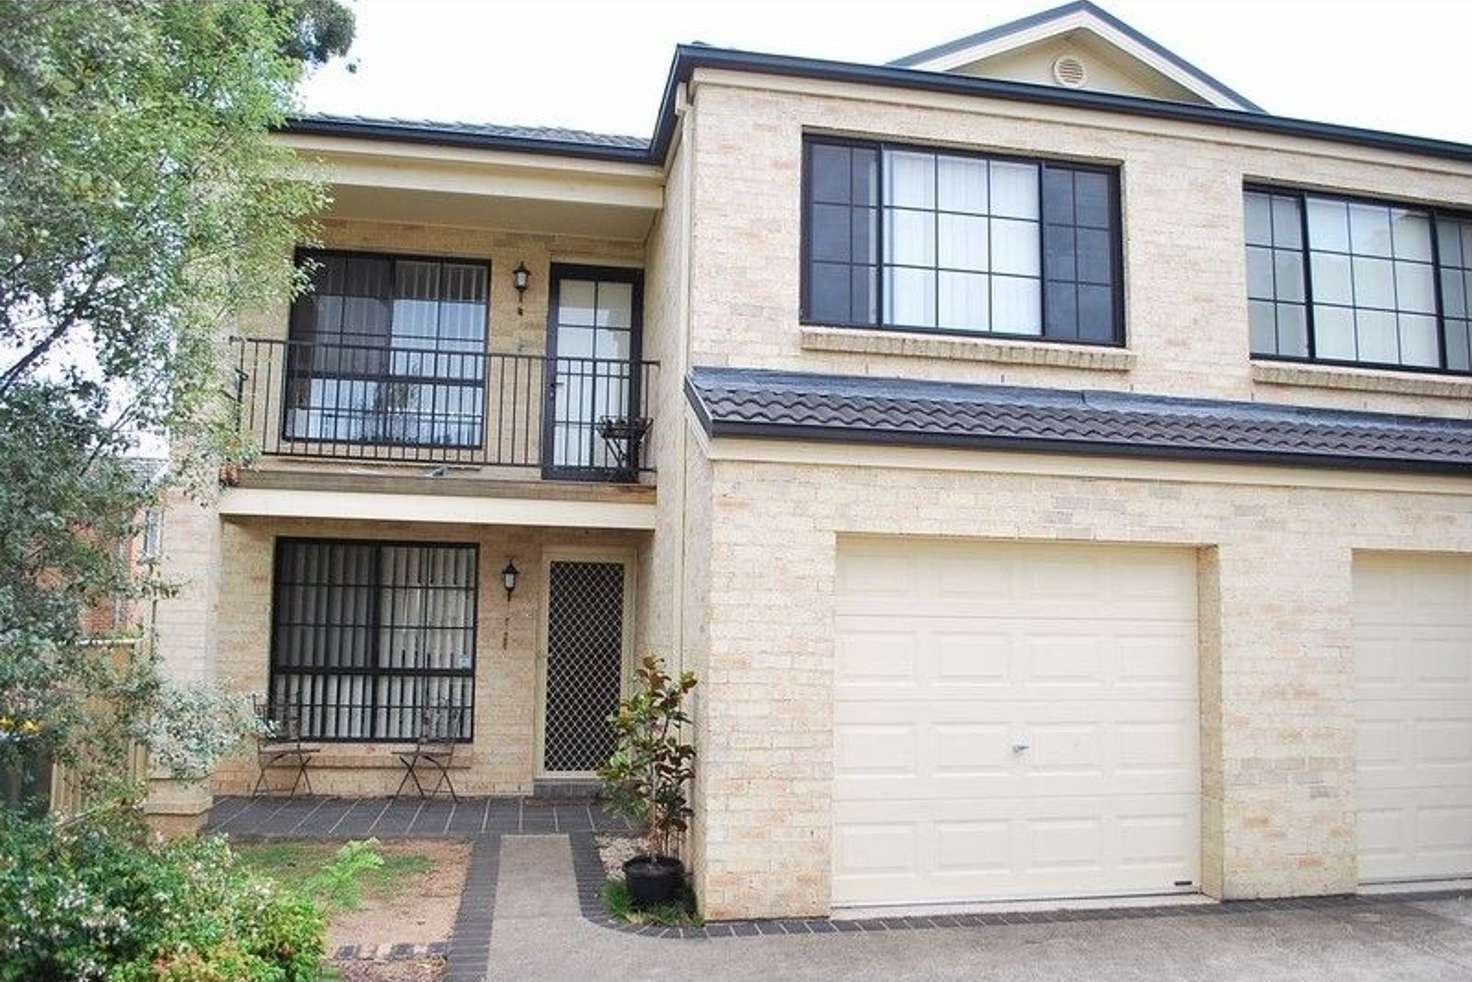 Main view of Homely house listing, 2-2/6 Mereil Street, Campbelltown NSW 2560